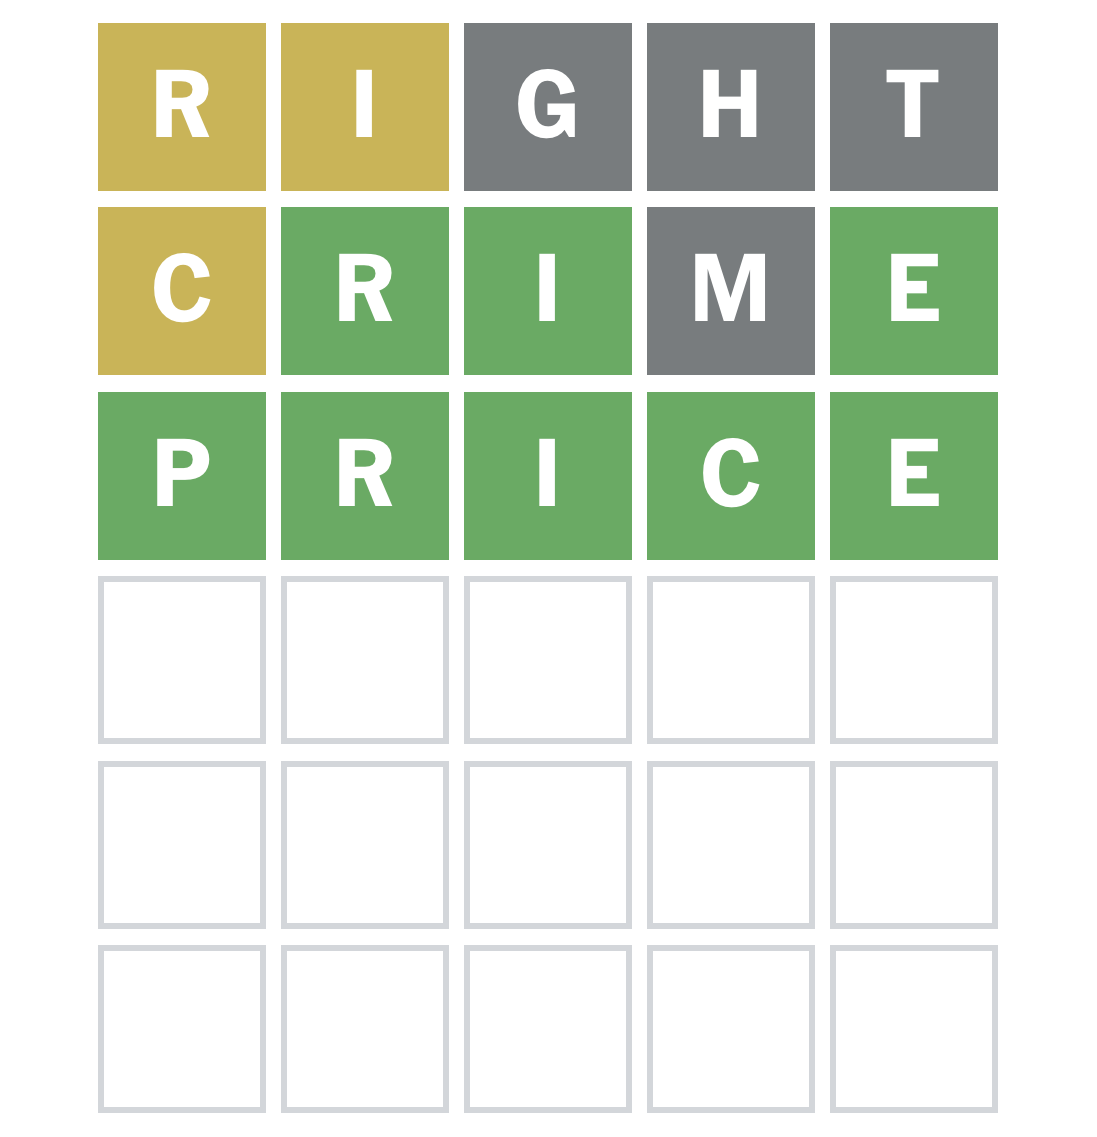 A wordl screenshot with the words: right, crime, price